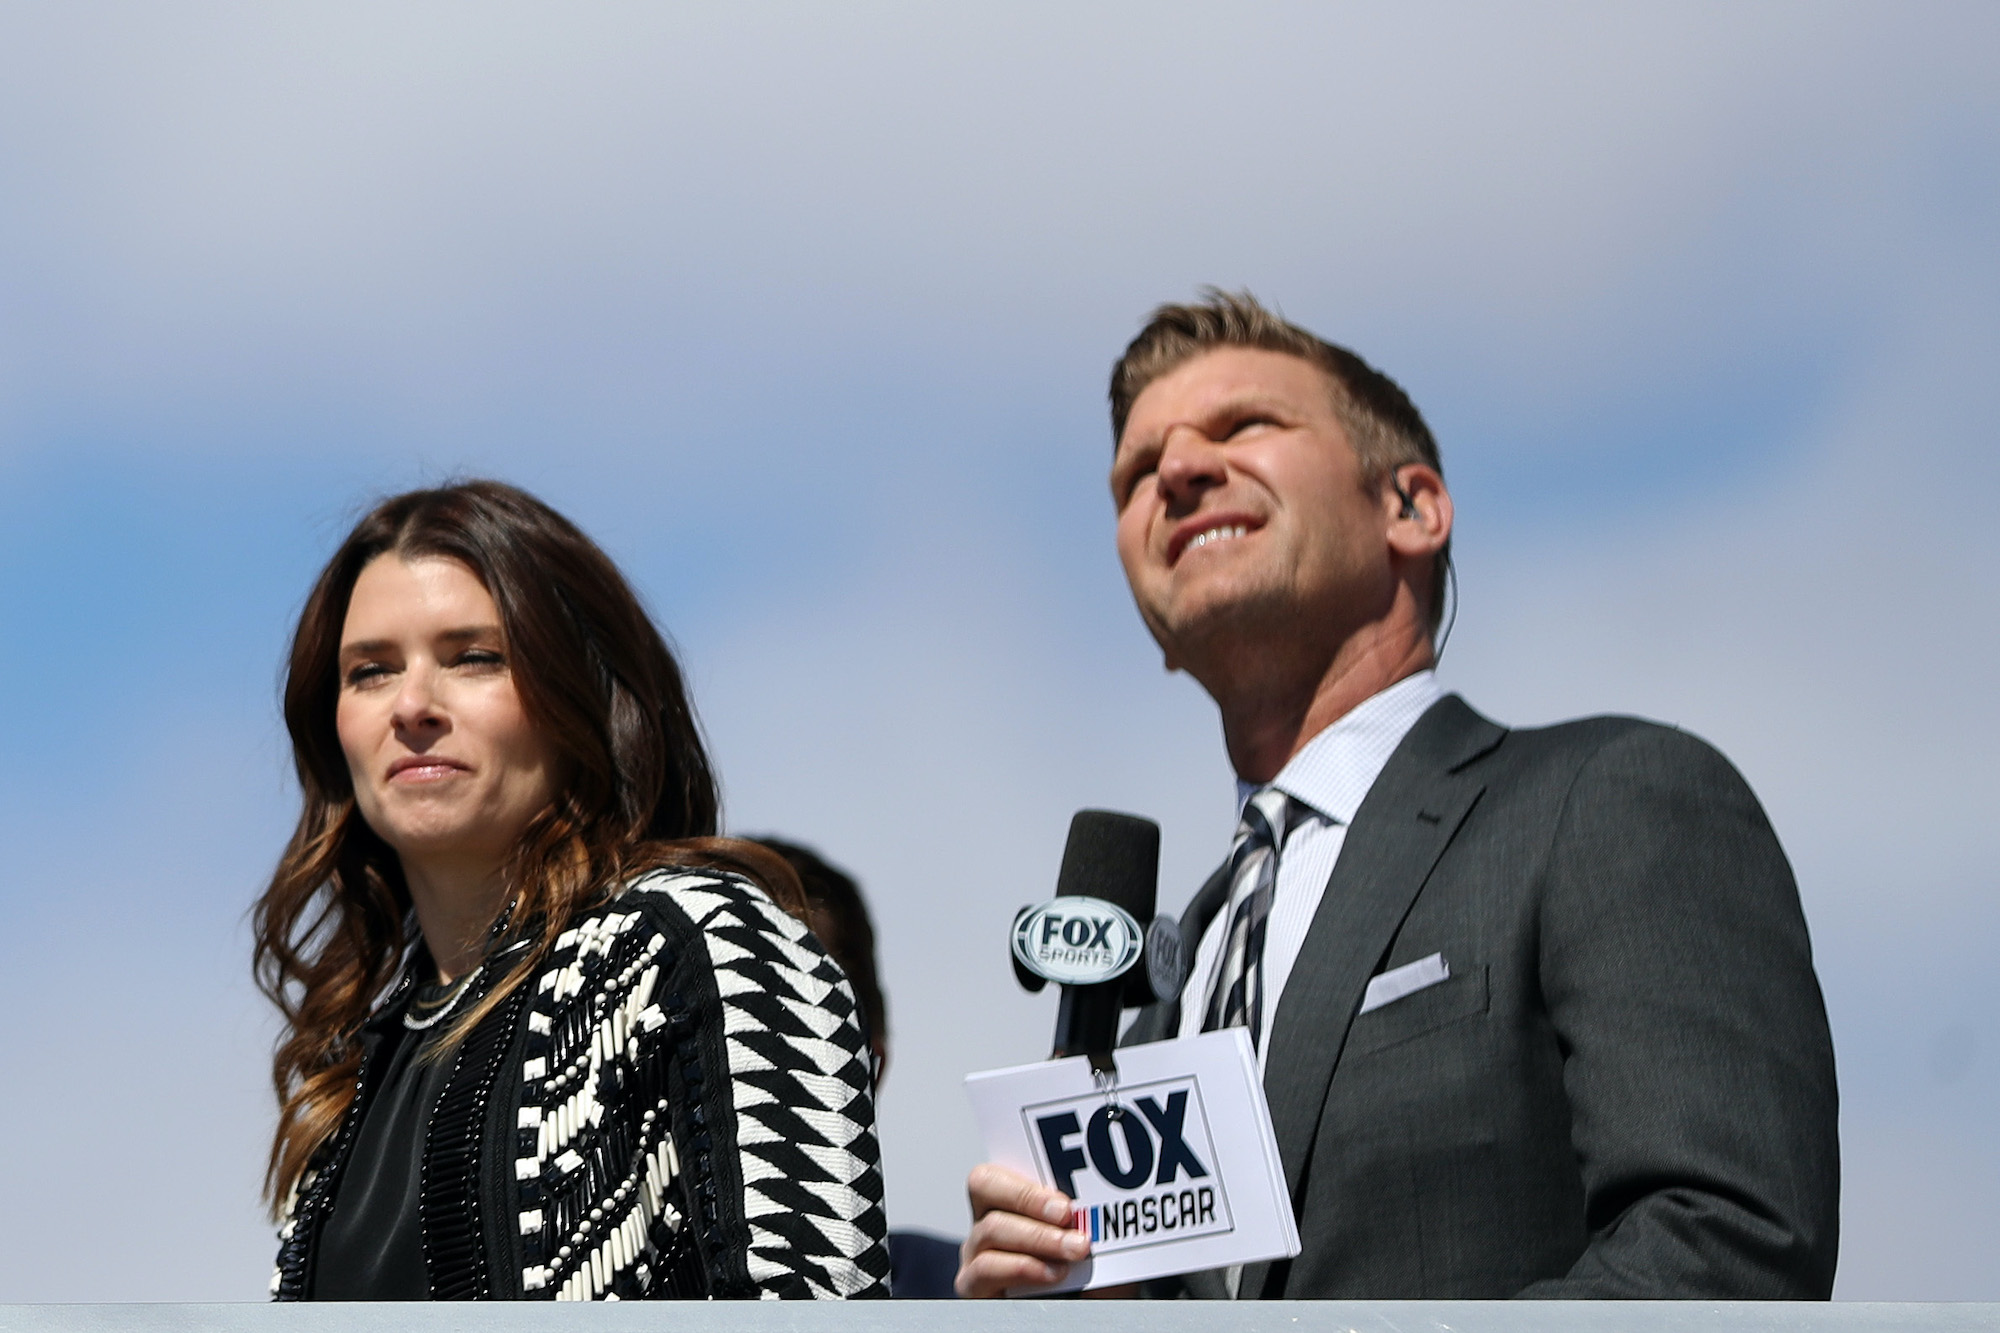 Clint Bowyer Shoots Down Danica Patrick and IndyCar: ‘That Doesn’t Work in This Real Racing of NASCAR’